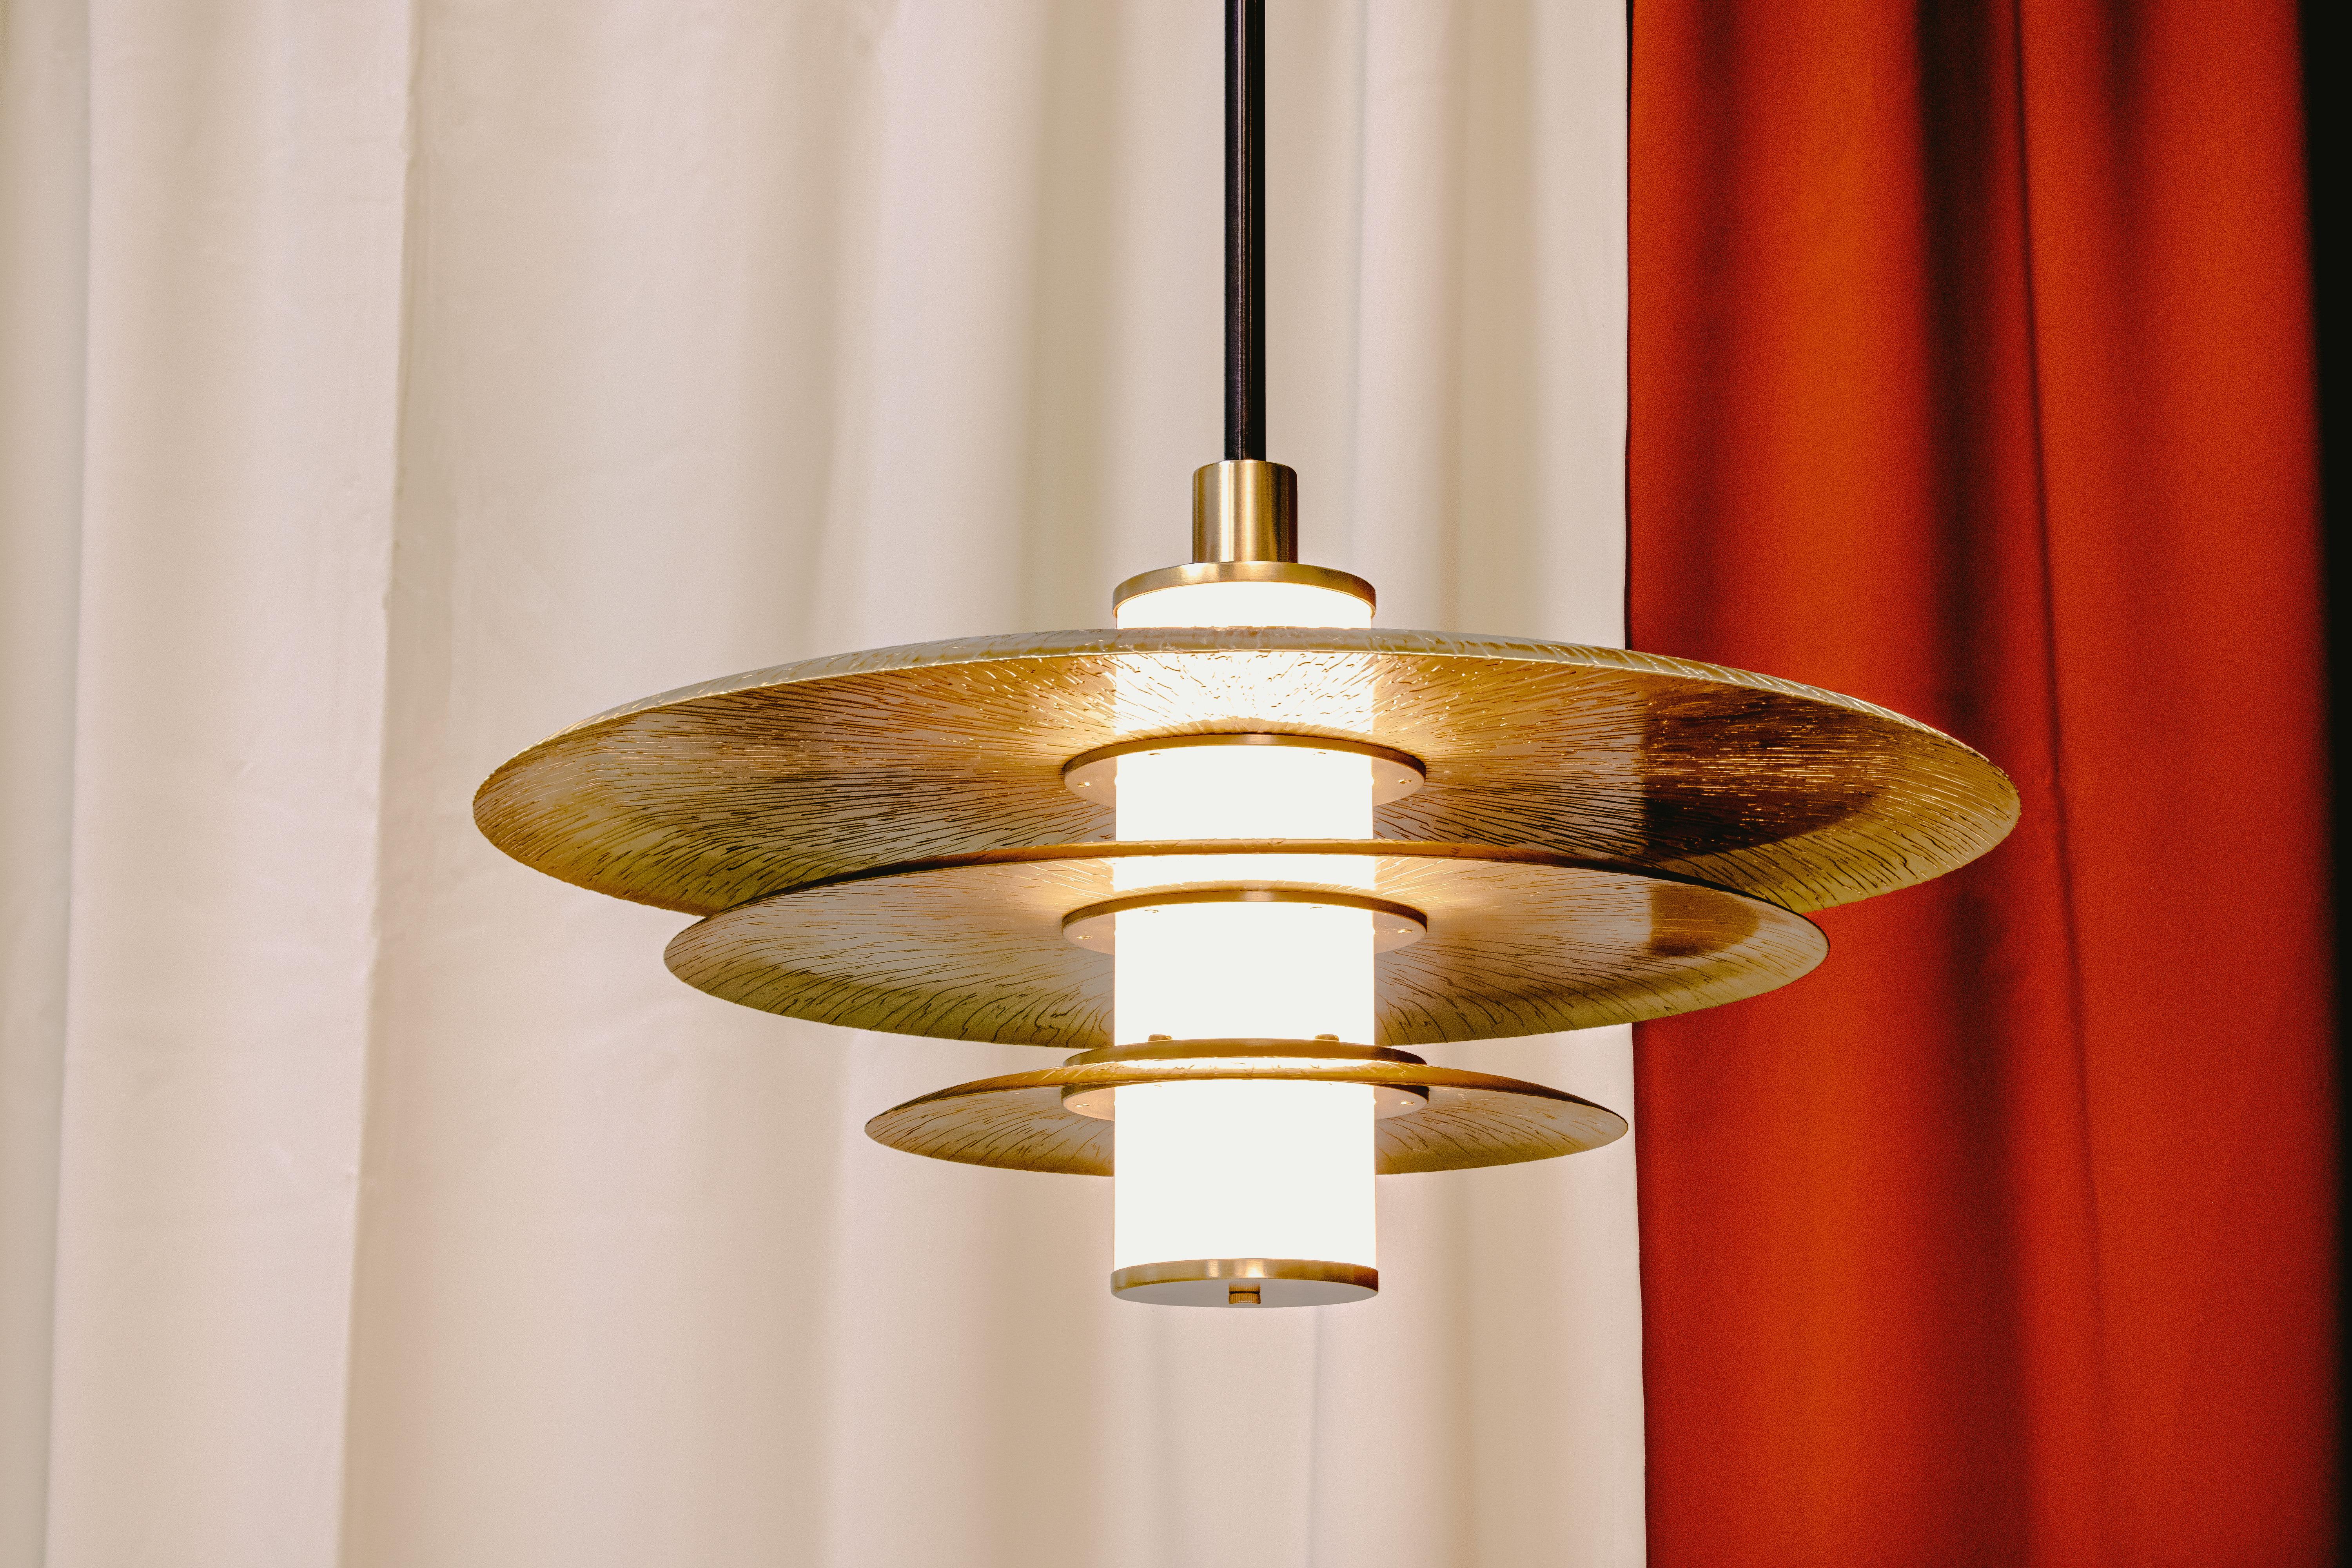 Spun Tiered Arthur Pendant Light in Etched Brass, White Glass and Blackened Brass For Sale